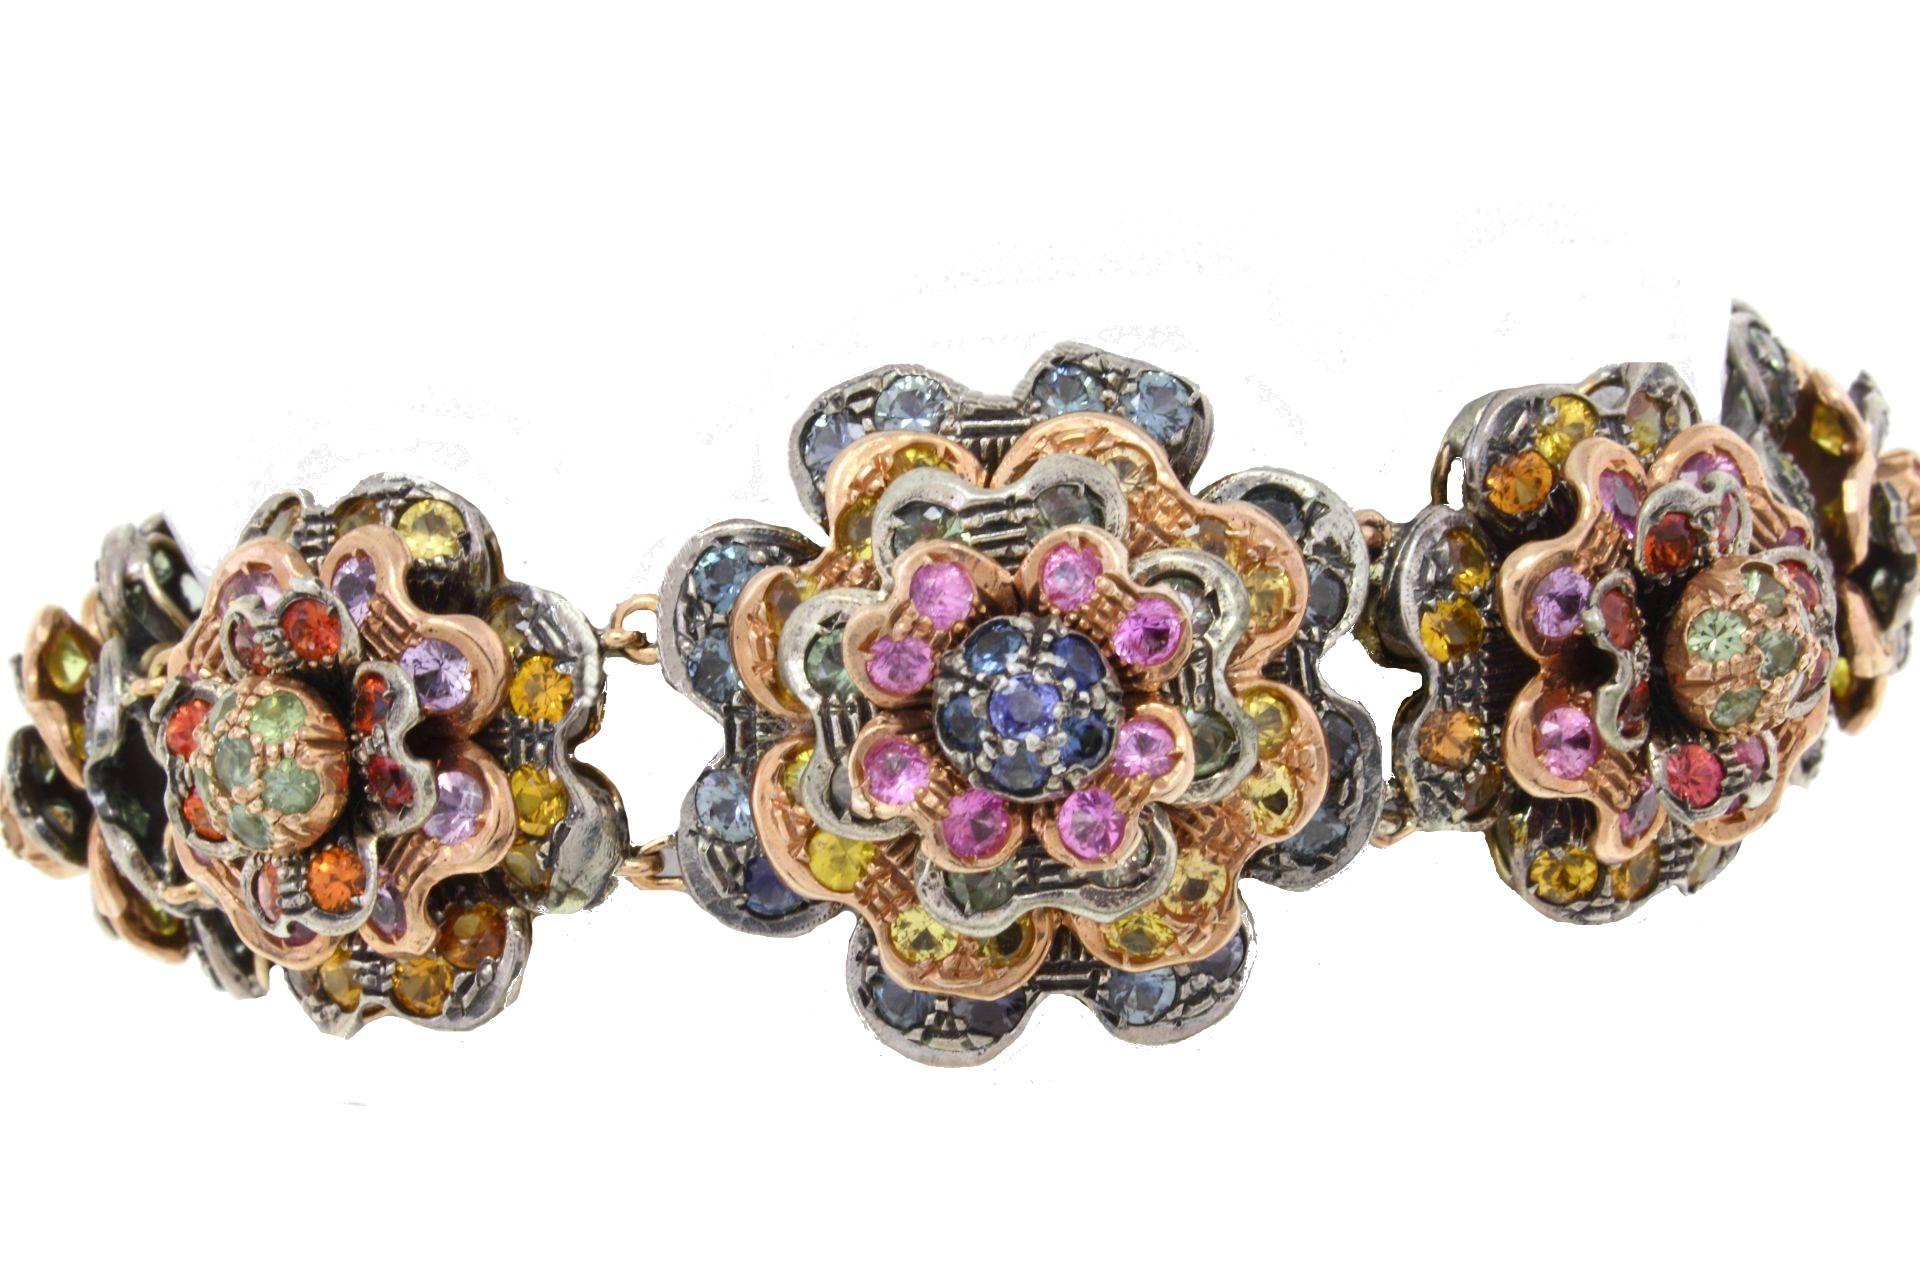 A lush of Spring with this multiflowers bracelet embellished with multi-colored sapphires. All in 9Kt gold and silver.
sapphires(39.00Kt)
Tot weight 81.5 gr.
R.f. 133384

For any enquires, please contact the seller through the message center.